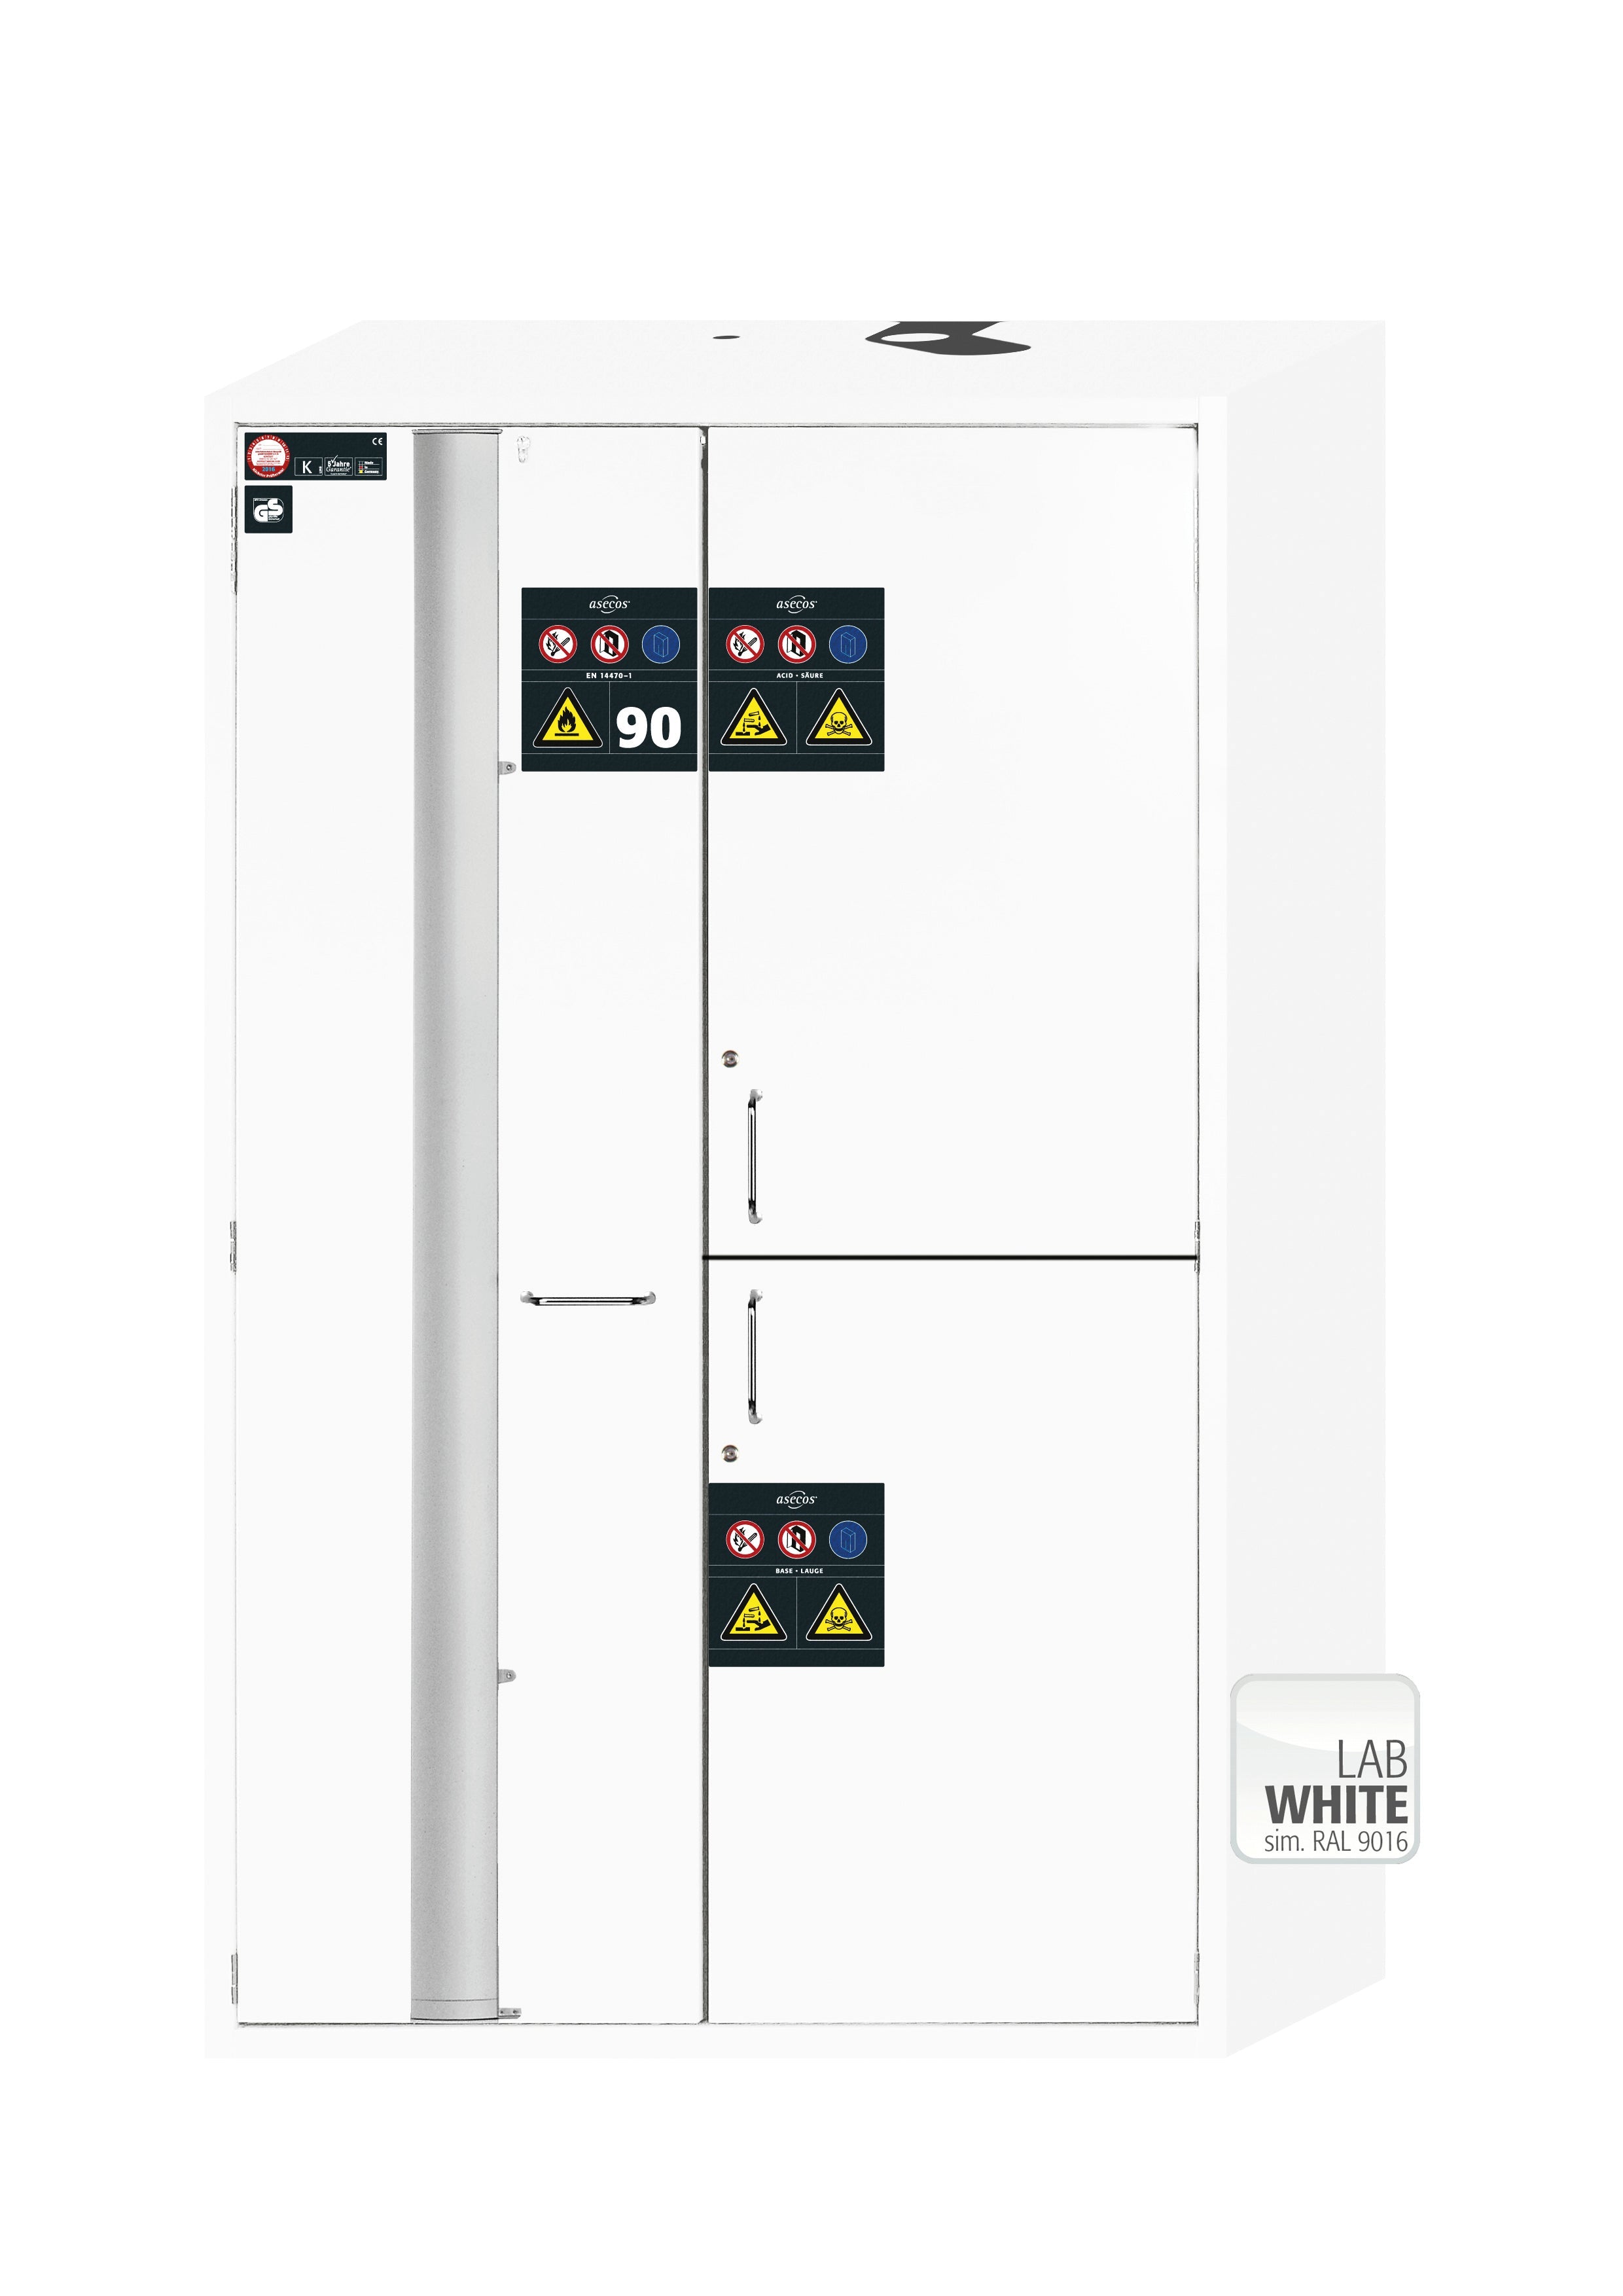 Type 90 combination safety cabinet K-PHOENIX Vol.2-90 model K90.196.120.MF.FWAC in laboratory white (similar to RAL 9016) with 6x standard pull-out tray (sheet steel)